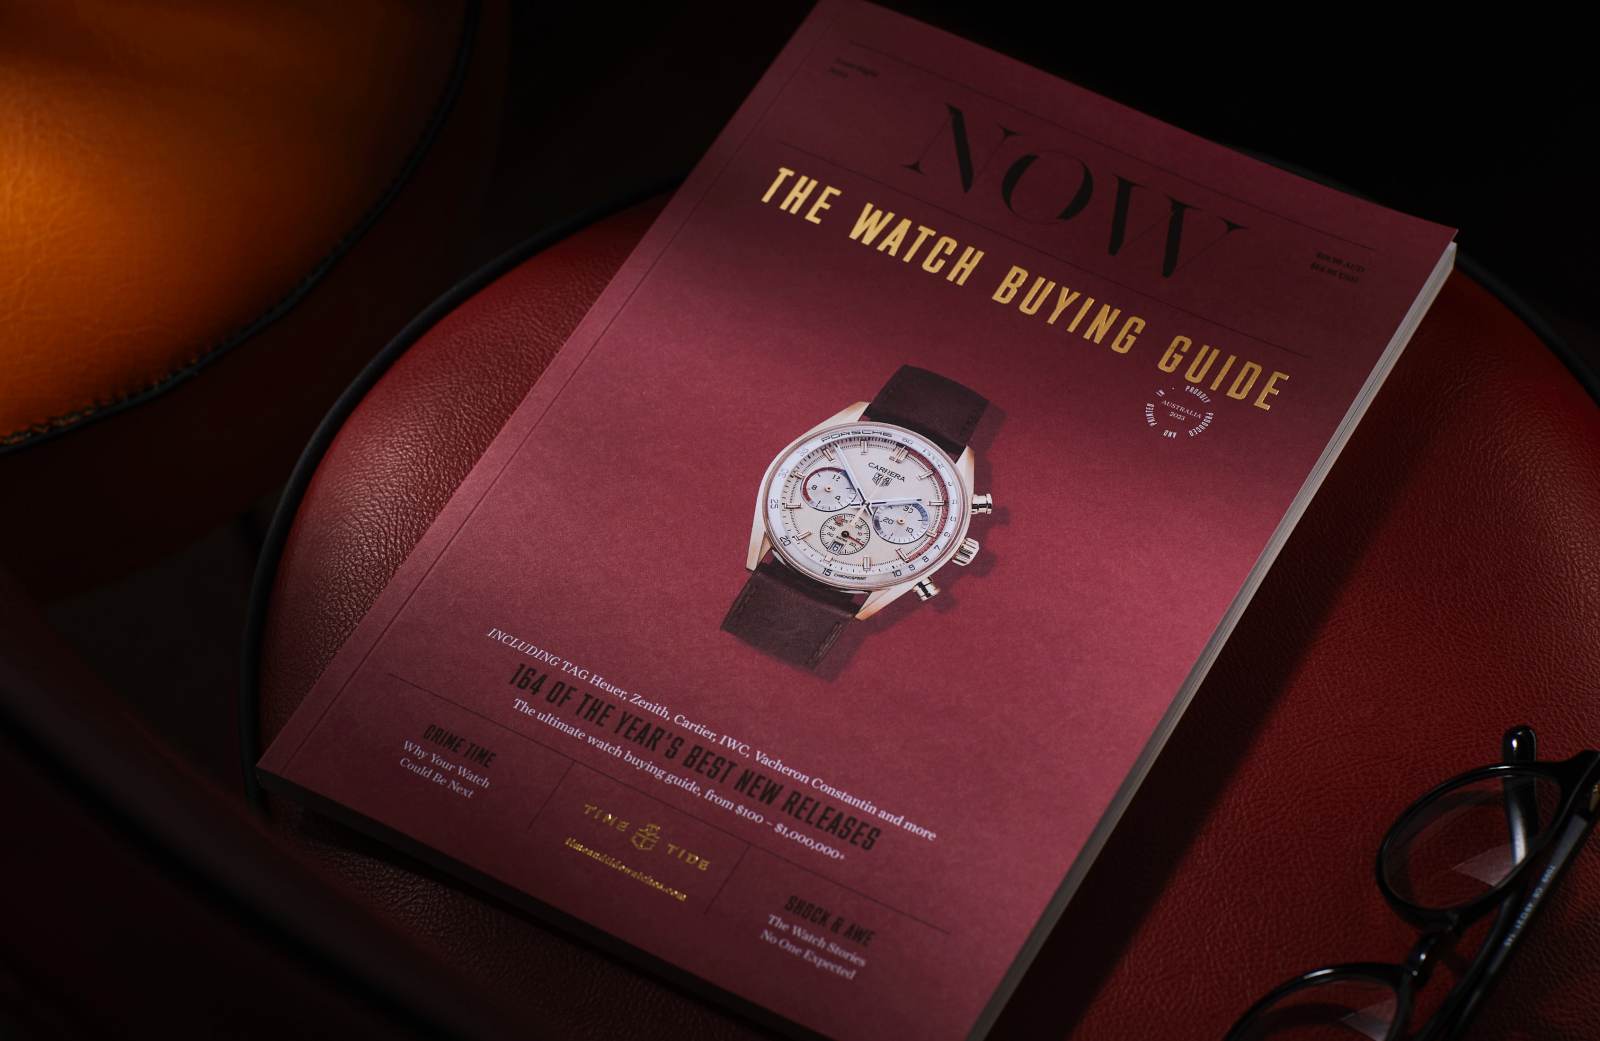 Machete-wielding crooks! Daredevil mountain rescues! A shed-load of watches! Yes, it’s Issue 8 of NOW, the Time+Tide Watch Buying Guide…